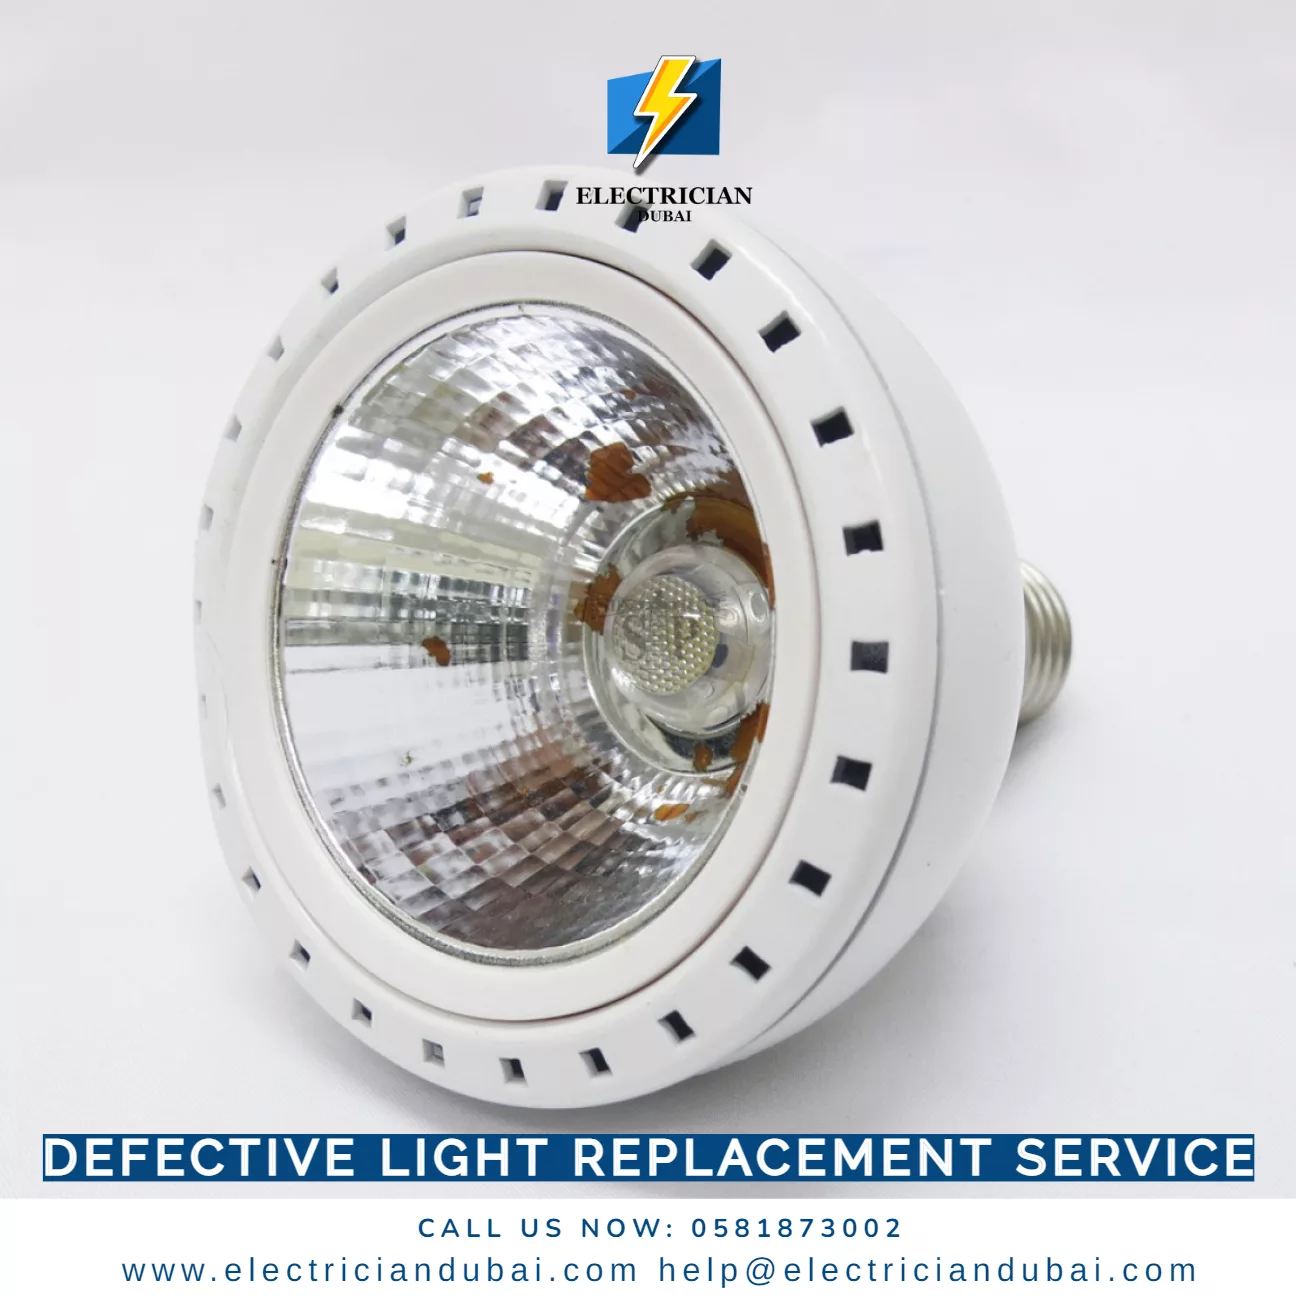 Defective Light Replacement Service